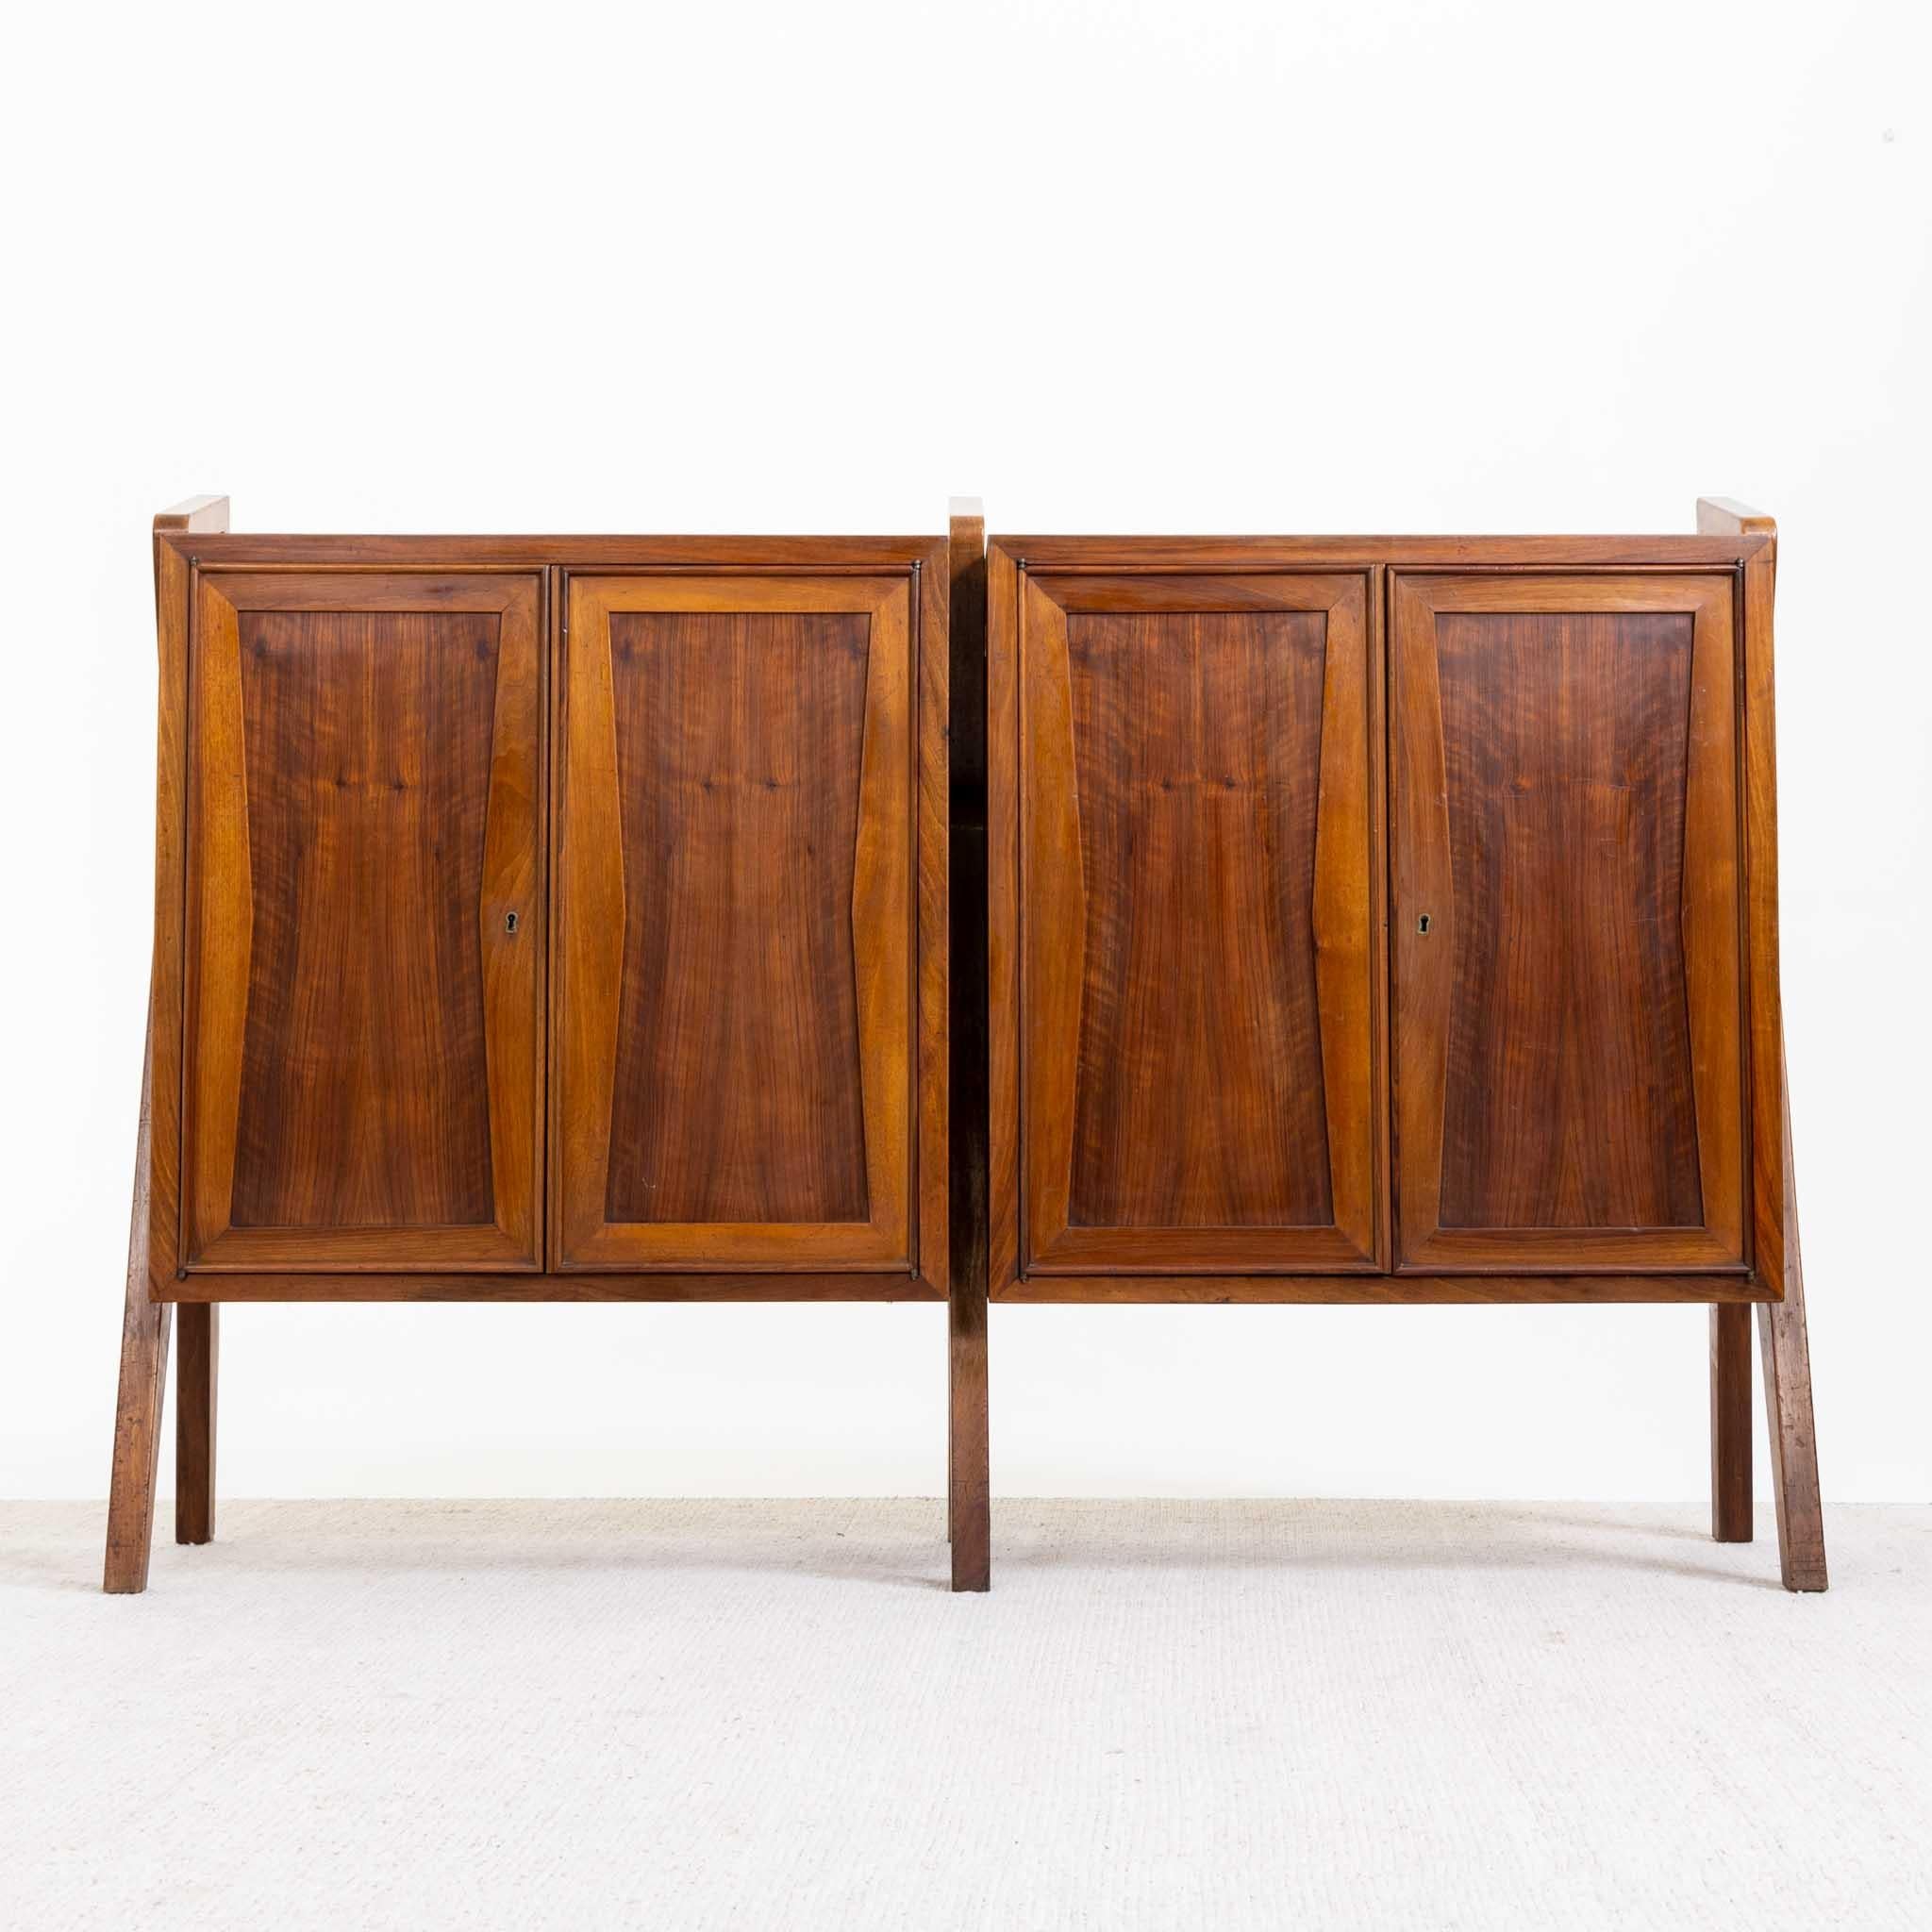 Italian mid-century sideboard or cabinet with four doors. The cabinet is made of walnut and mounted on three sculptural leg supports. The sideboard has been polished by hand and has a beautiful veneer pattern on the front.